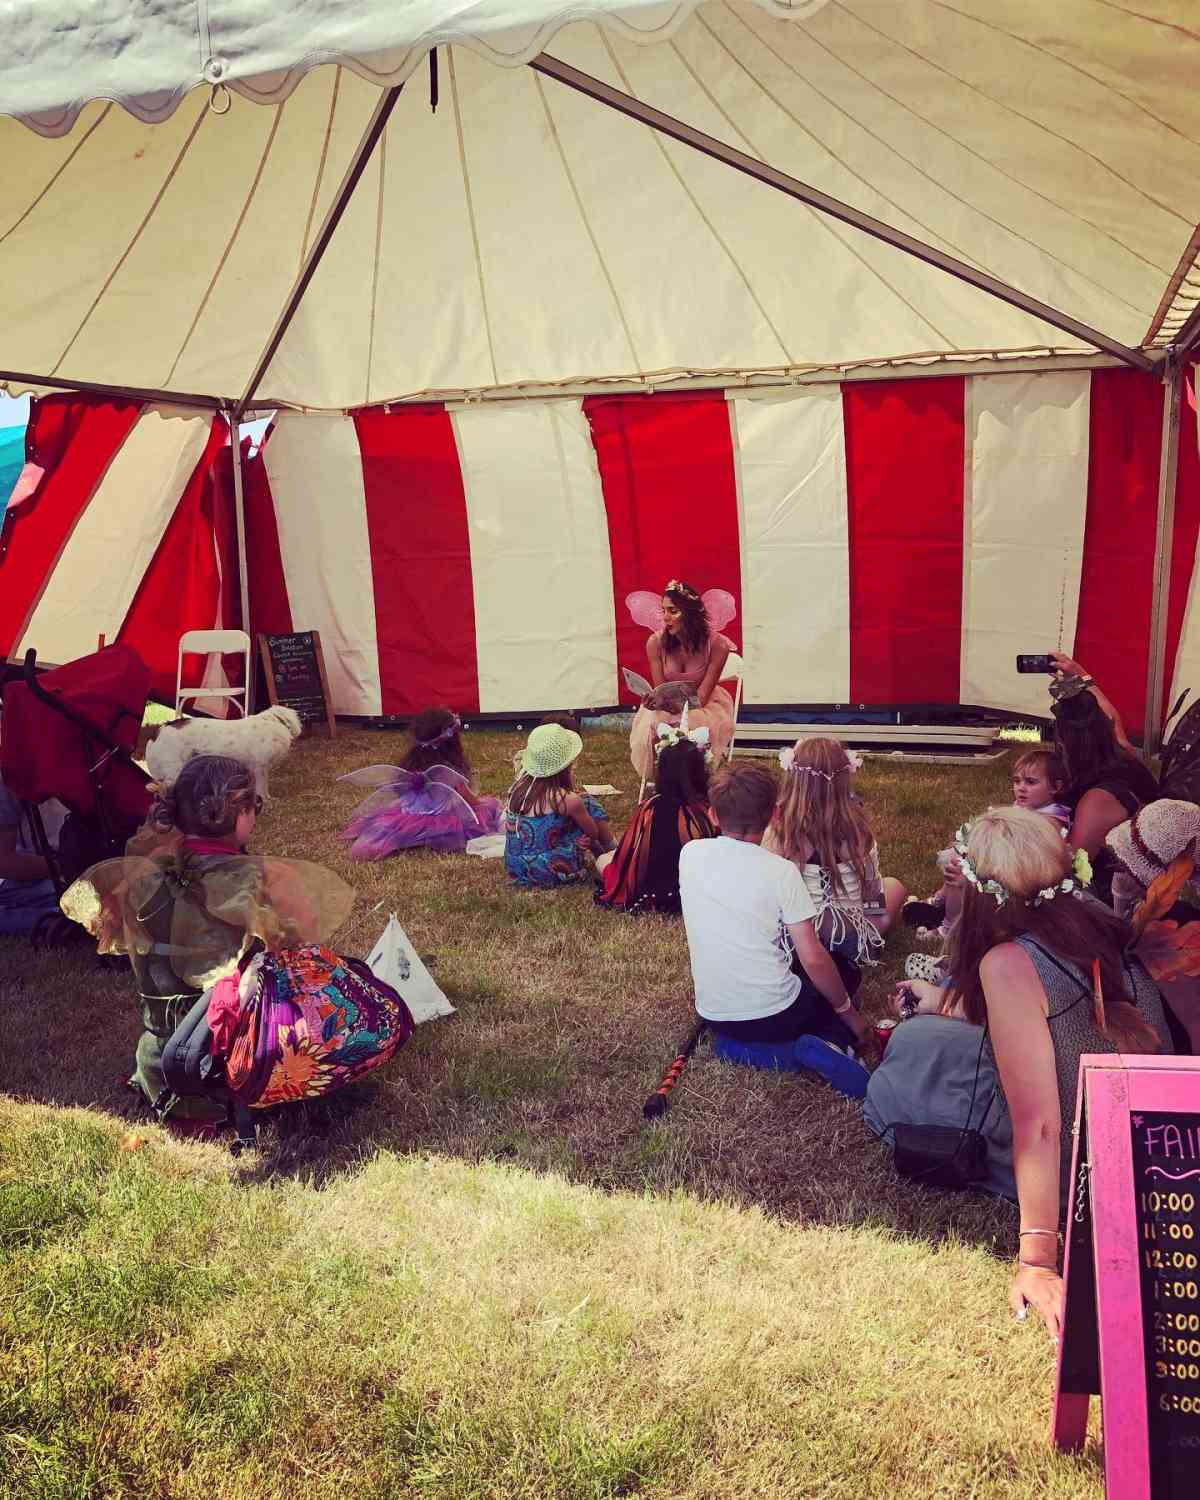 The-Faery-Tales-Lucy-Ela-Walmsley-Attended-Festival-Cornwall-Austin-Macauley-Publishers